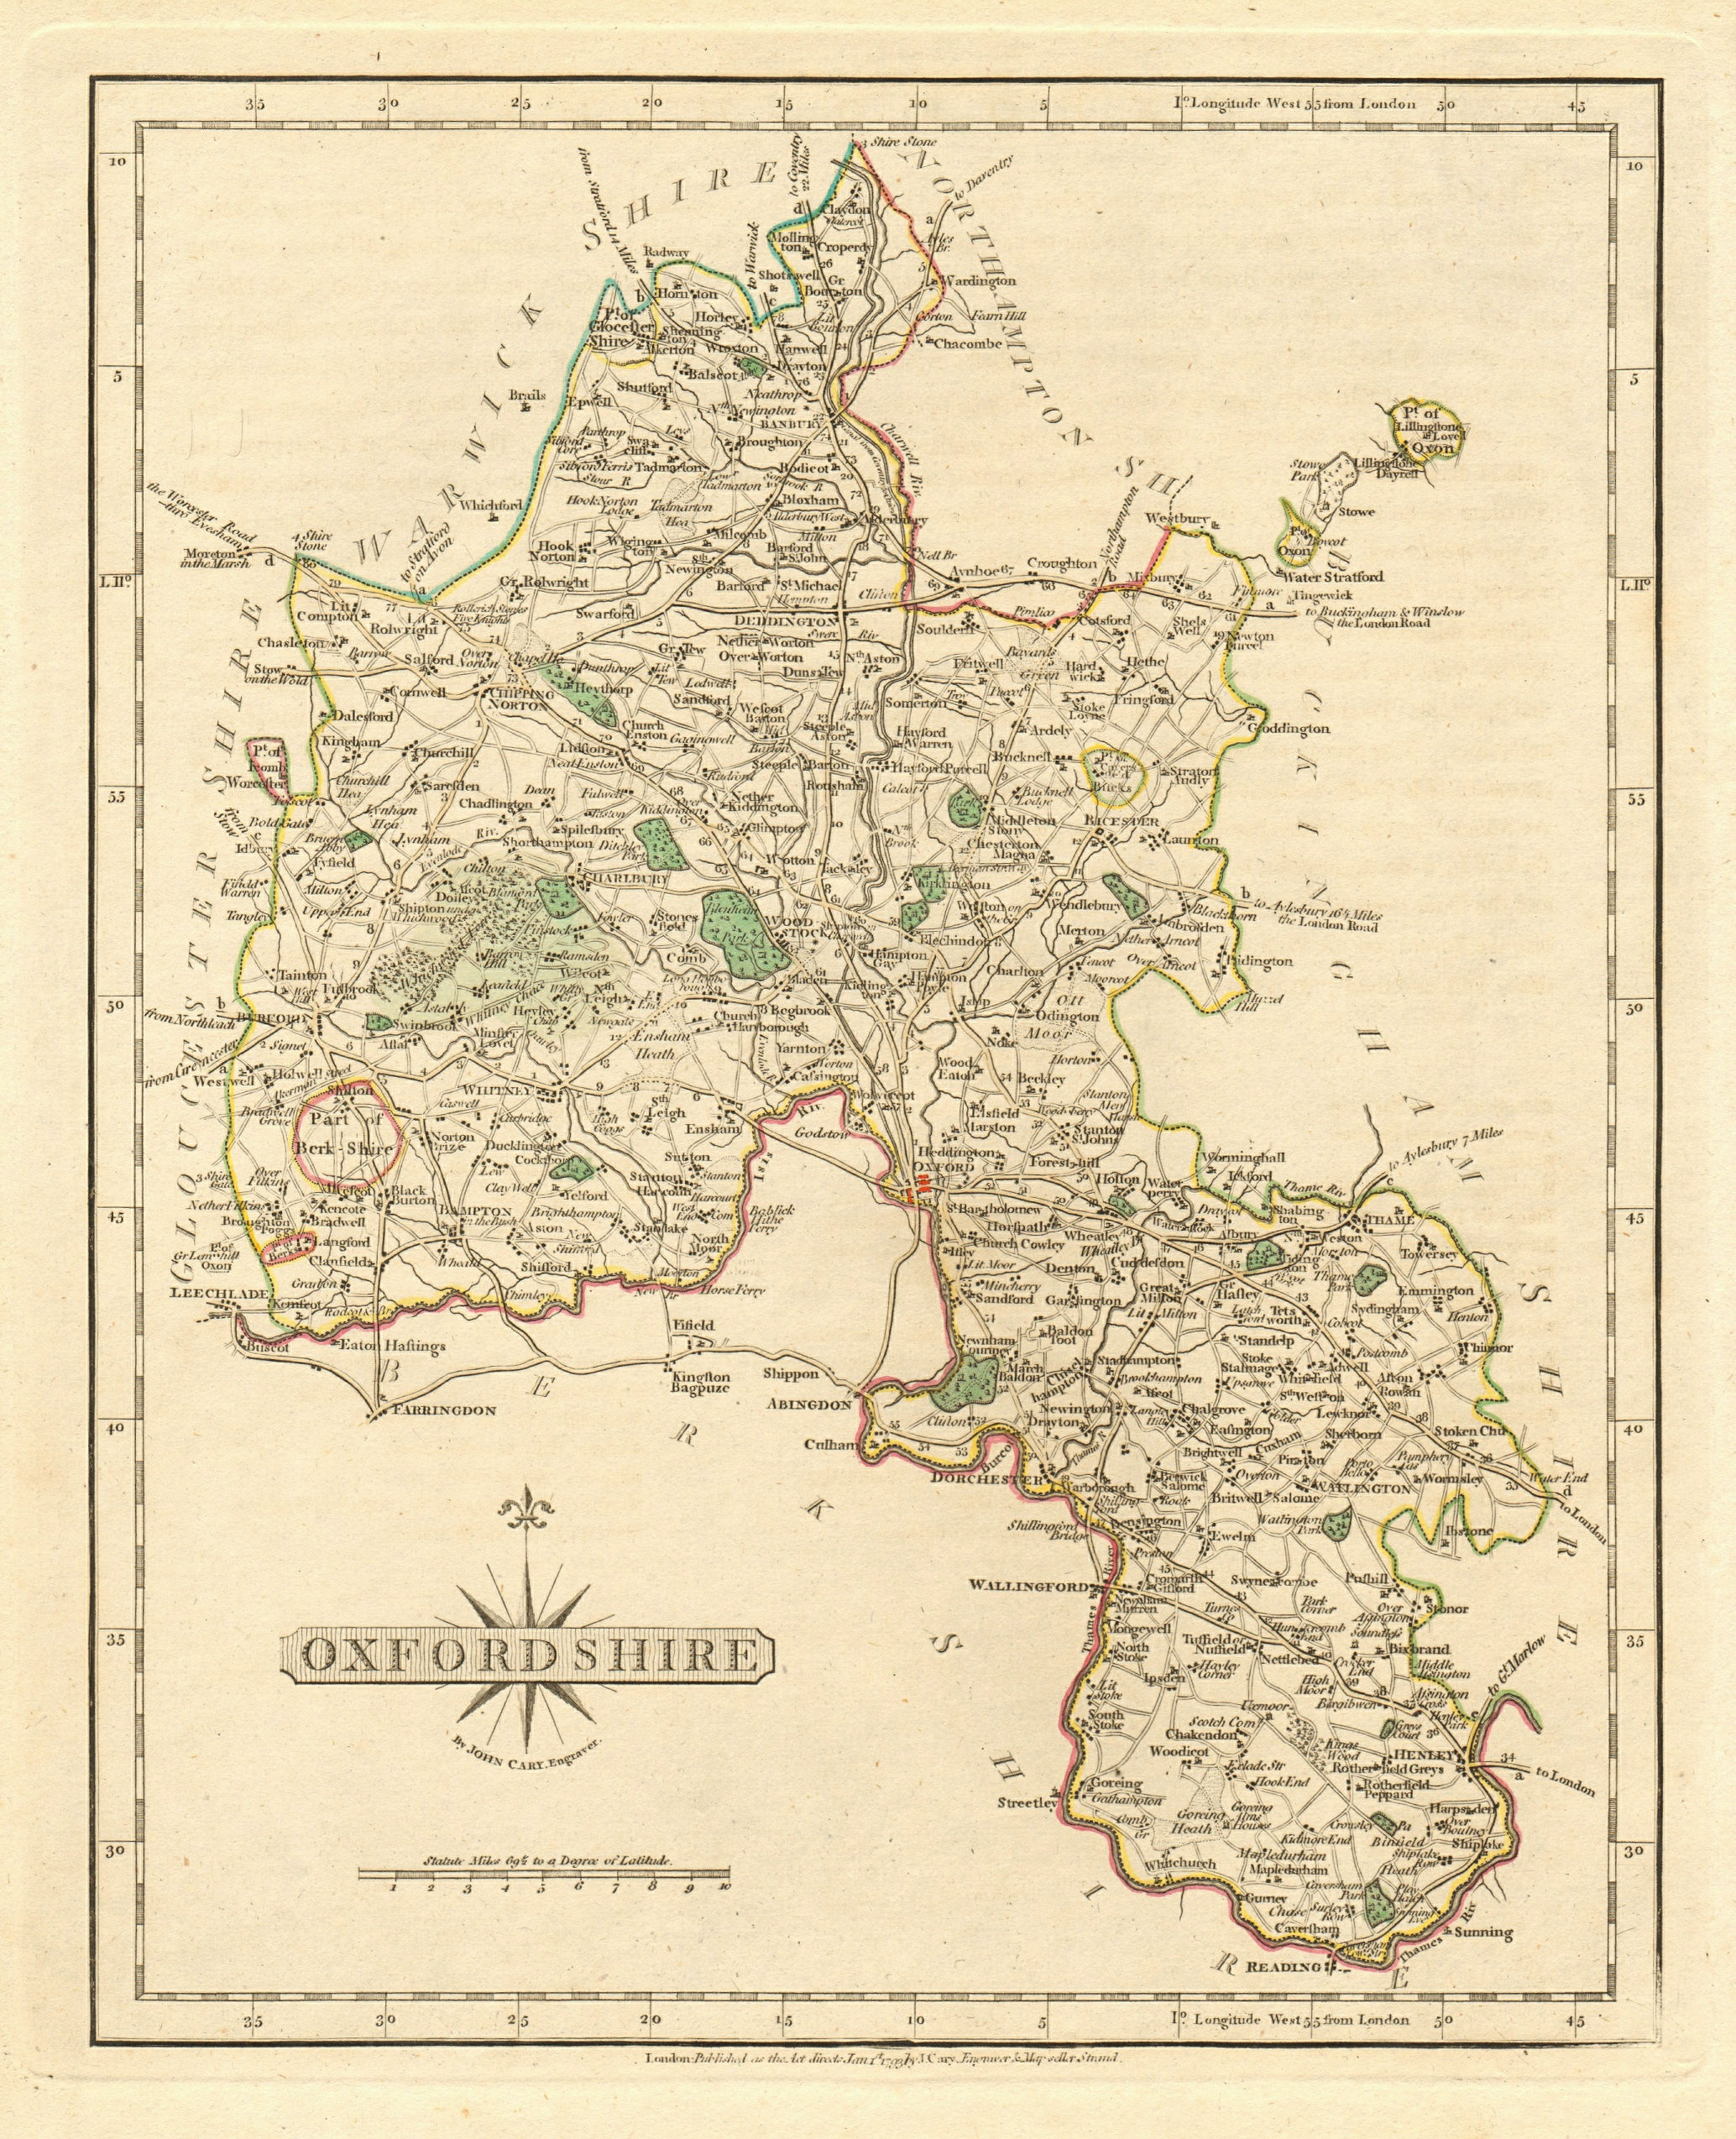 Associate Product Antique county map of OXFORDSHIRE by JOHN CARY. Original outline colour 1793